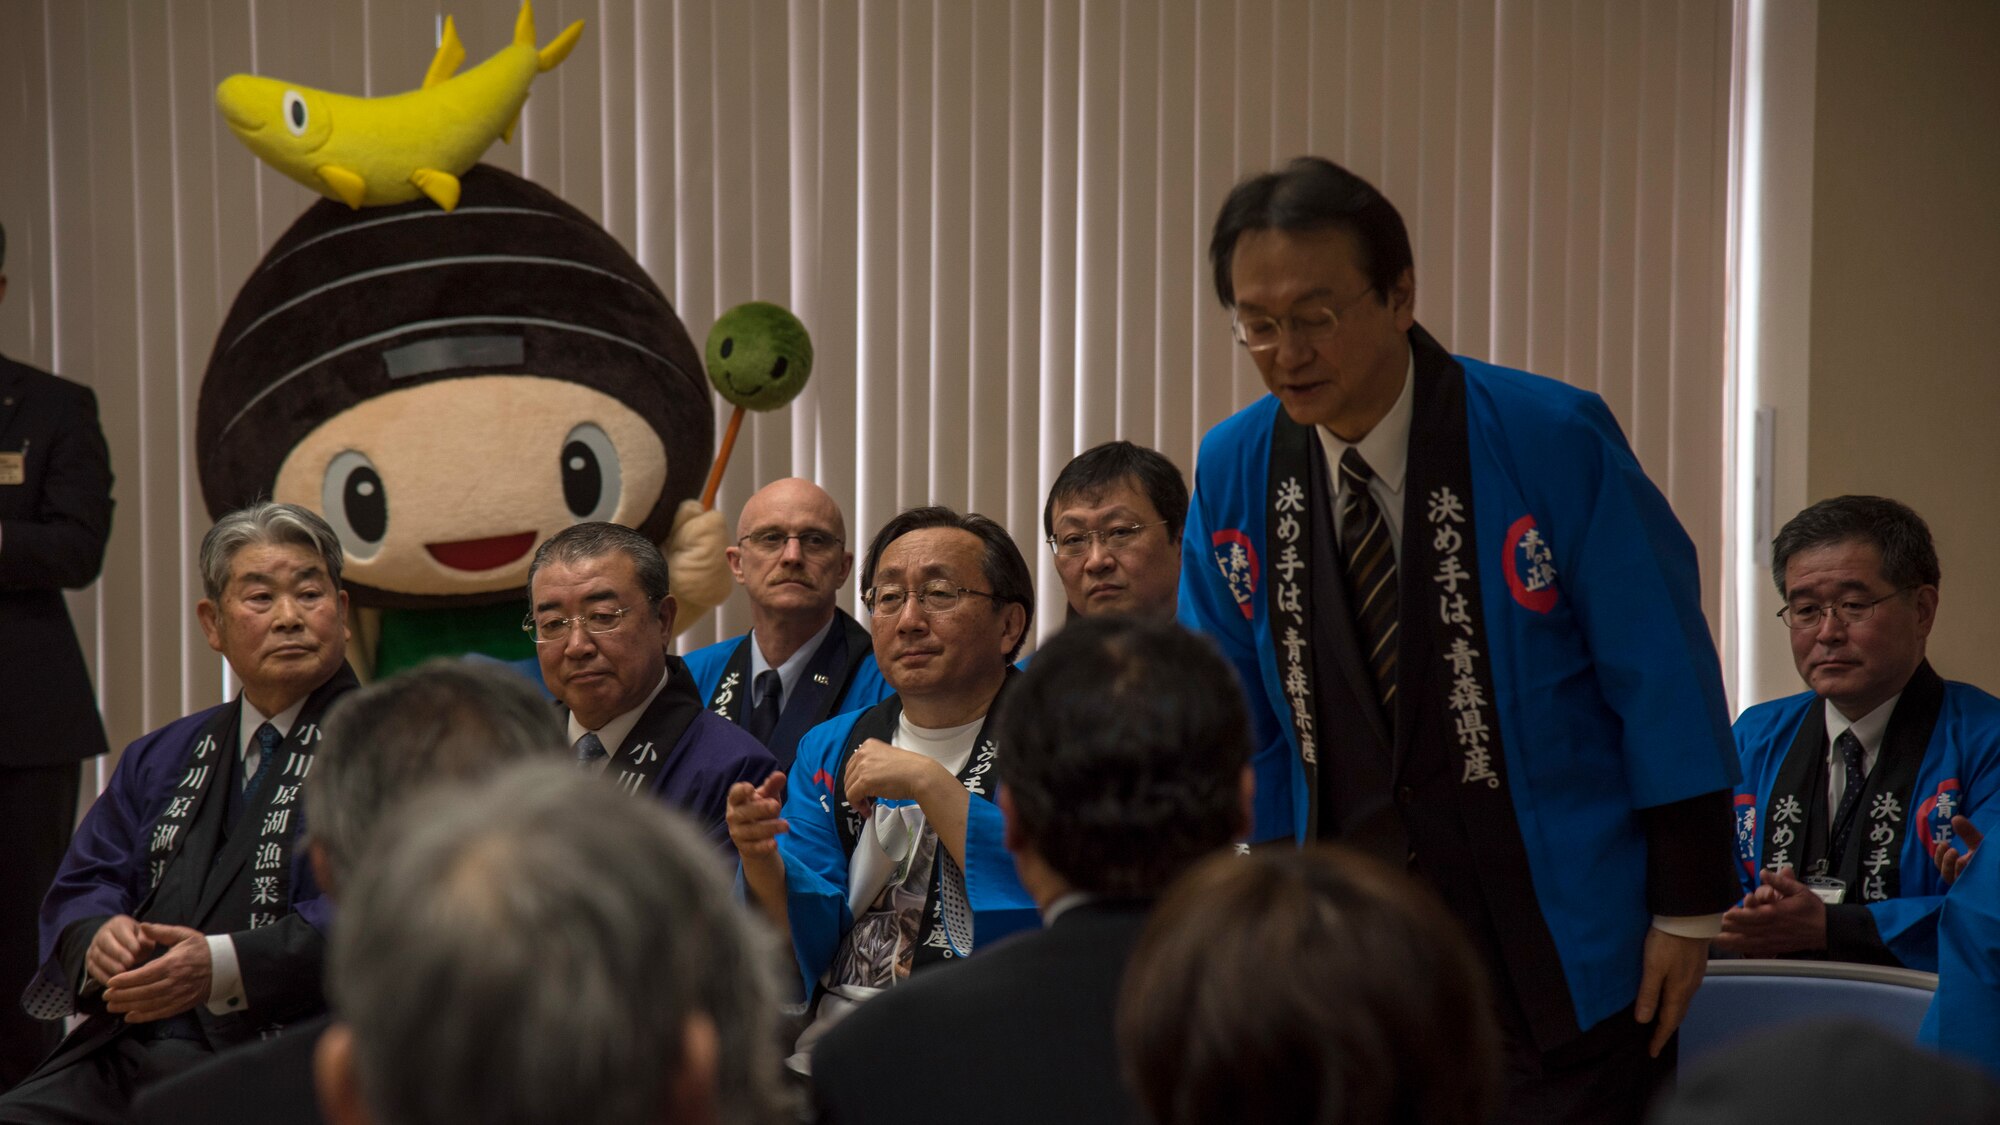 Akinori Eto, a member of the House of Representatives , bows at the Lake Ogawara Appreciation event in Tohoku Town, Japan, April 15, 2018. The event focused on community relations and fundamentals for the U.S. and Japan alliance. (U.S. Air Force photo by Airman 1st Class Collette Brooks)